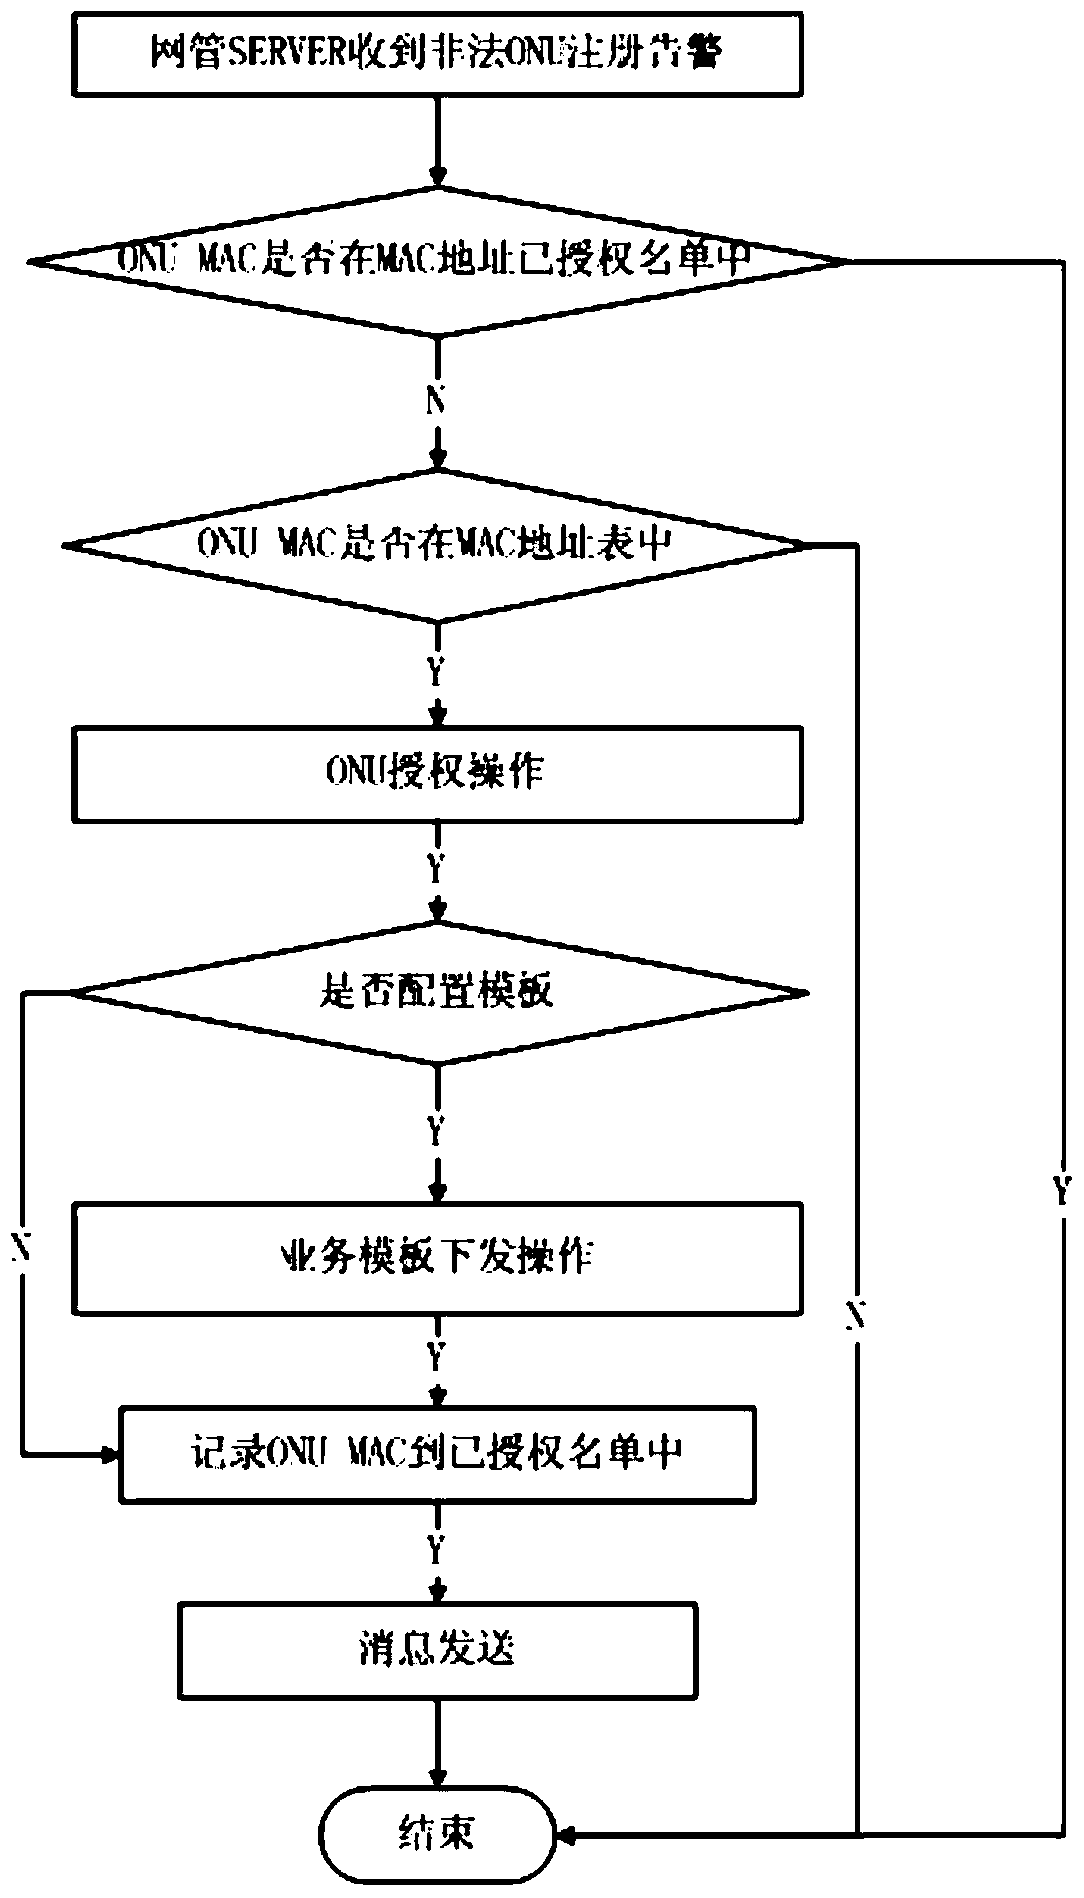 Fiber-to-the-home terminal automatic configuration method and system based on epon network